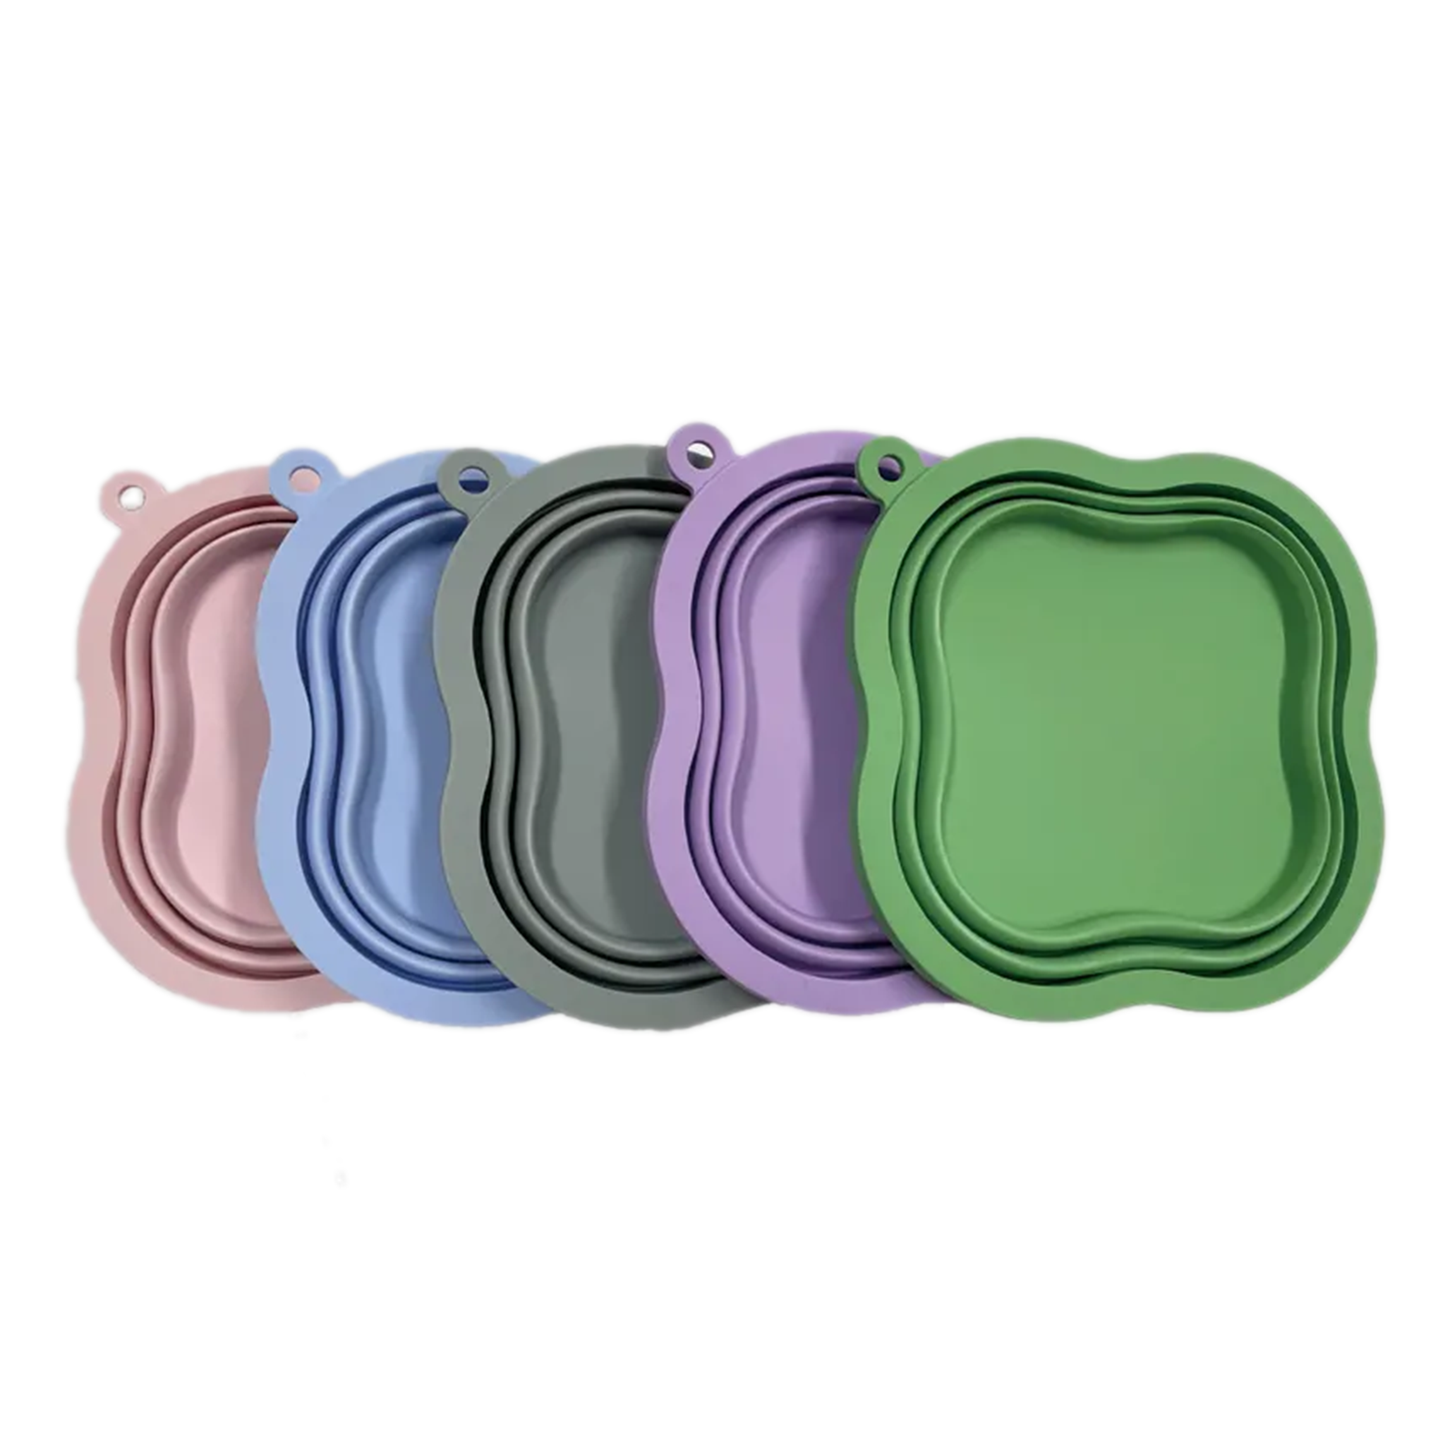 Image of Woofingdales product - Collapsible Dog Bowls